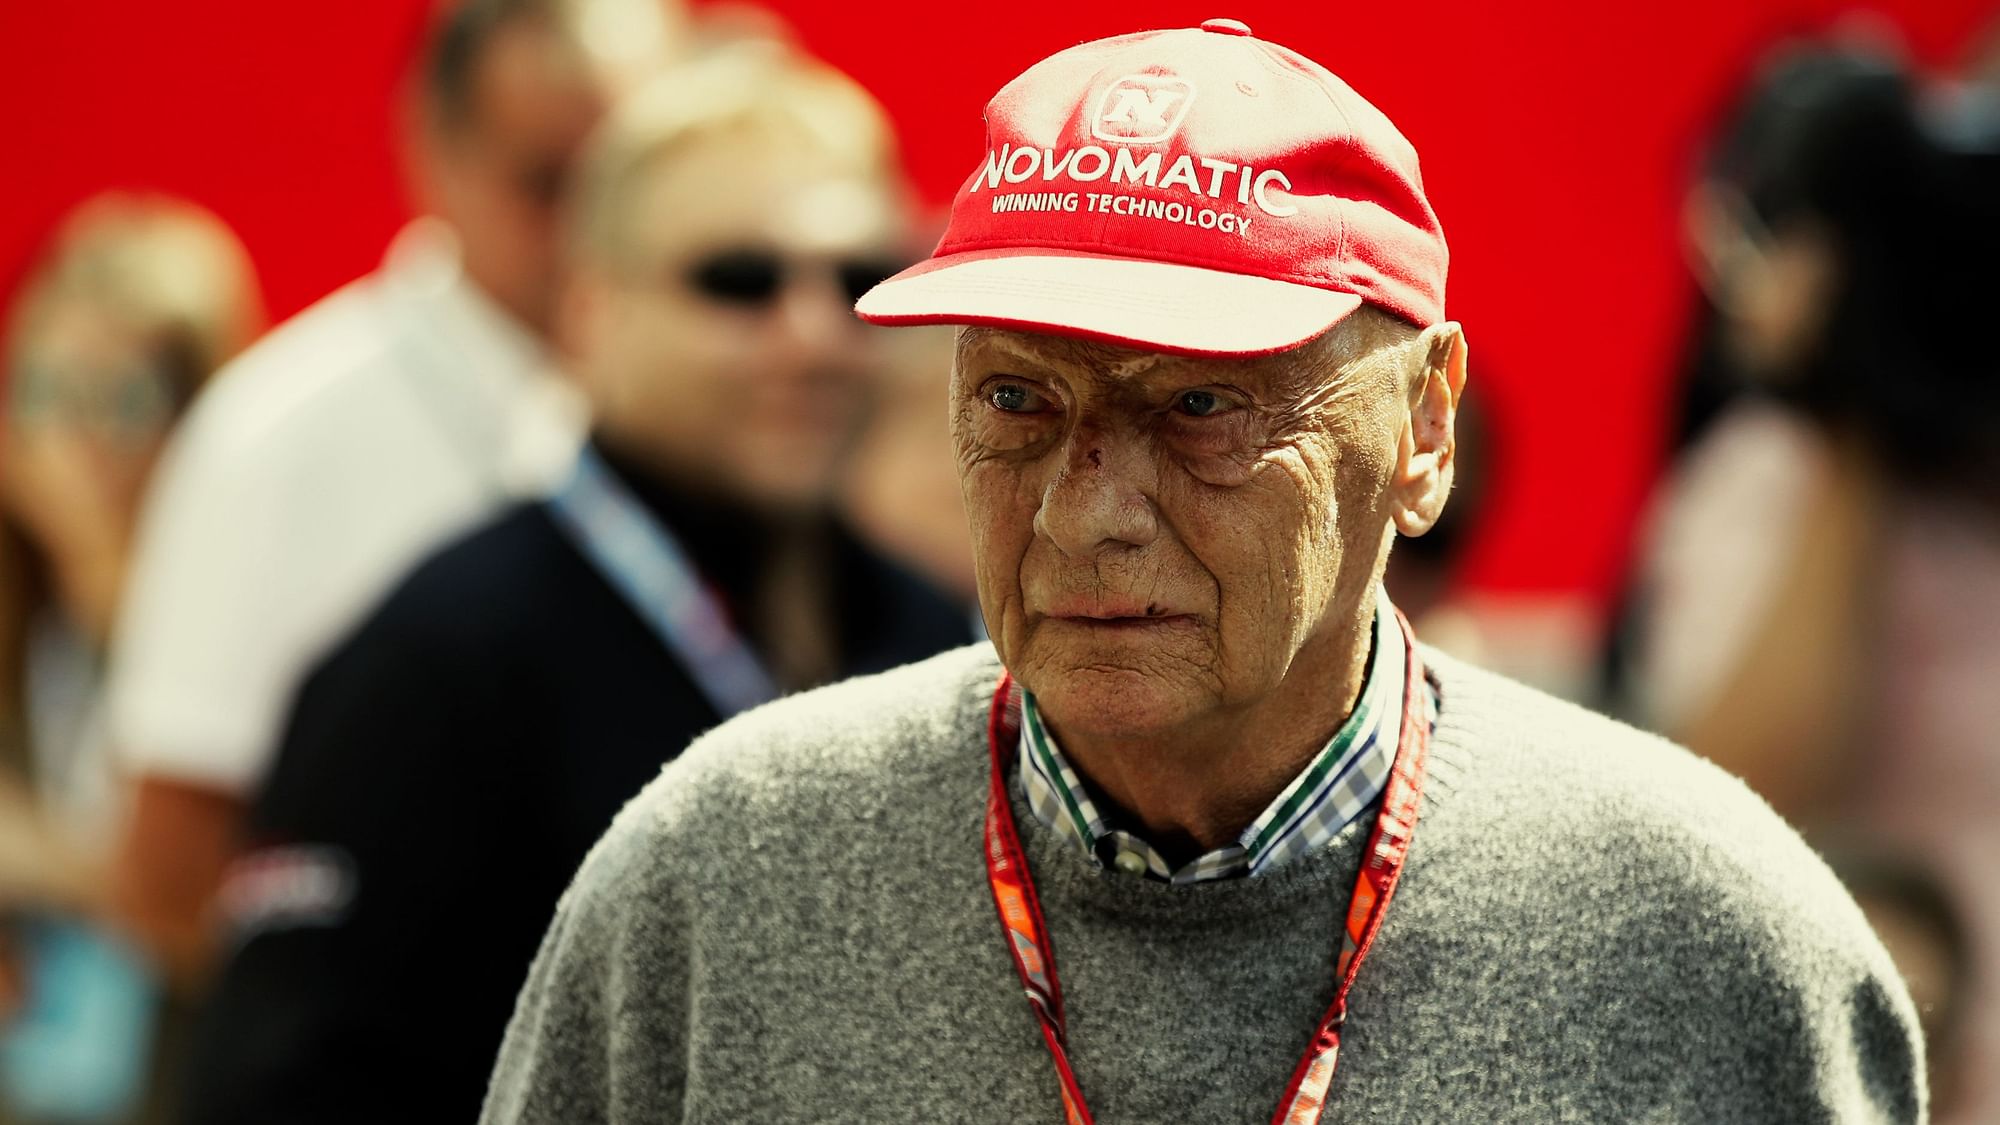 Niki Lauda won the F1 drivers’ championship in 1975 and 1977 with Ferrari and again in 1984 with McLaren.